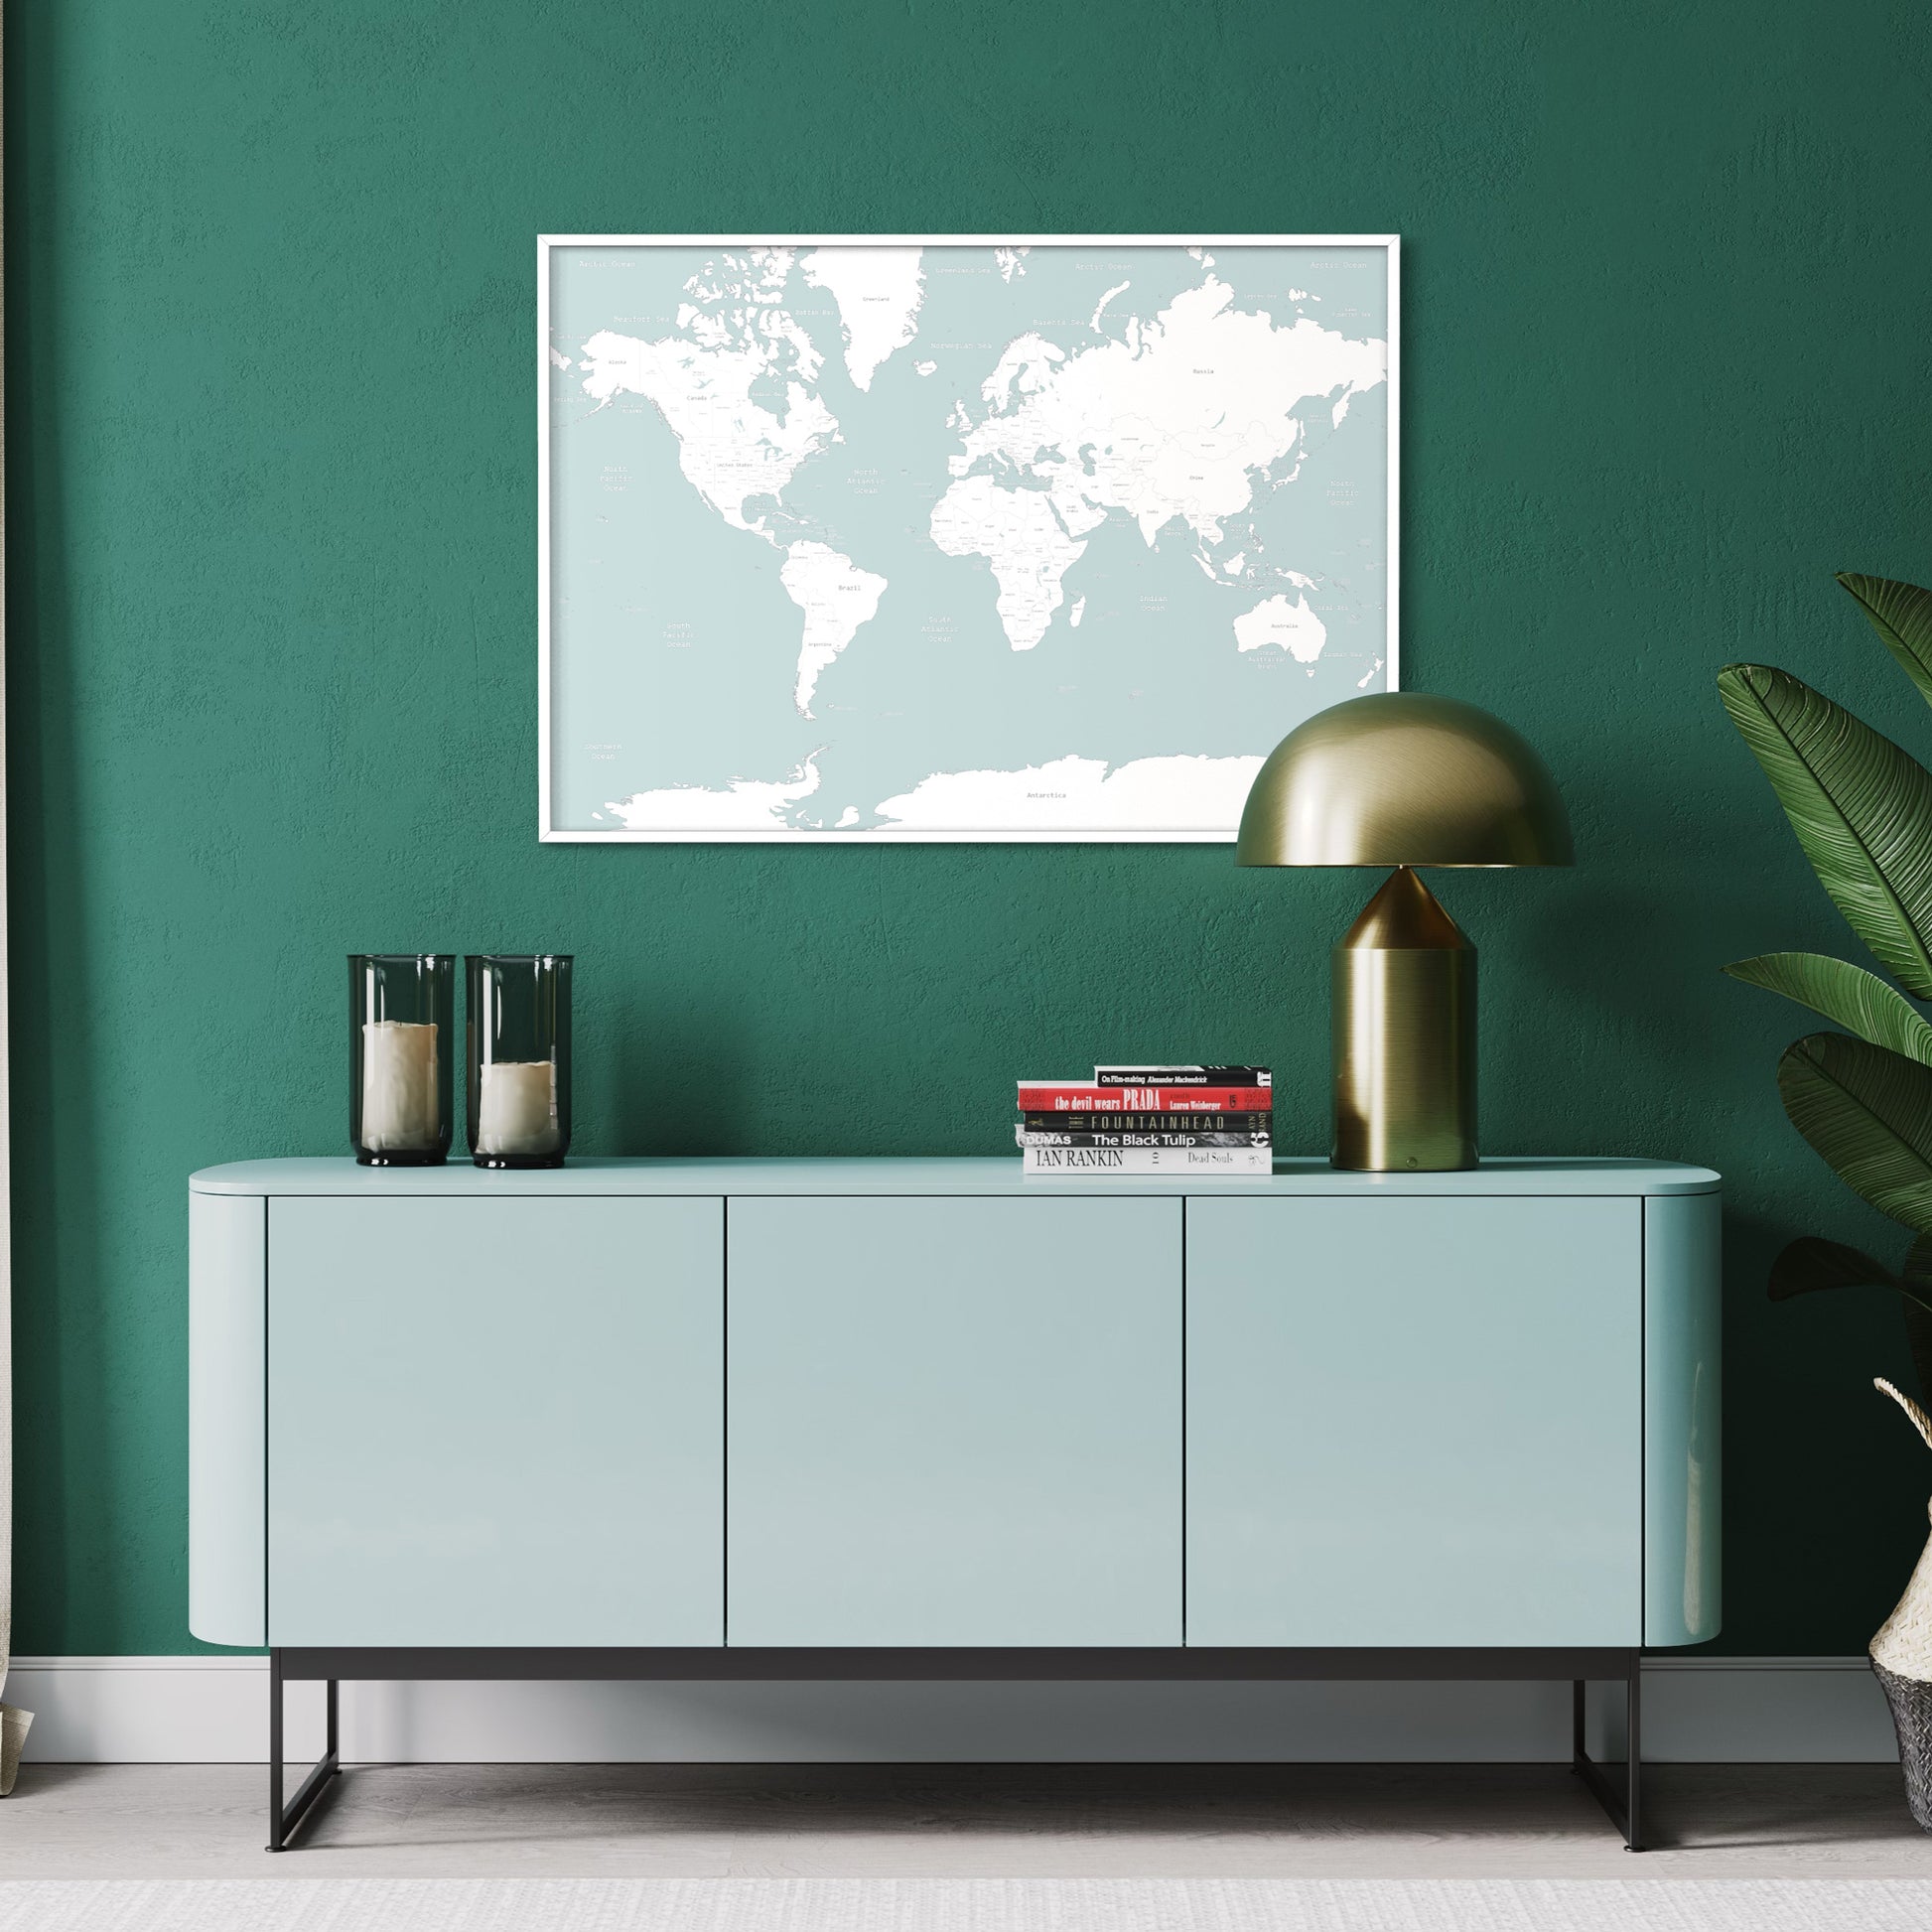 Pale Blue Map of the World Poster Print on Green Wall Above Sideboard